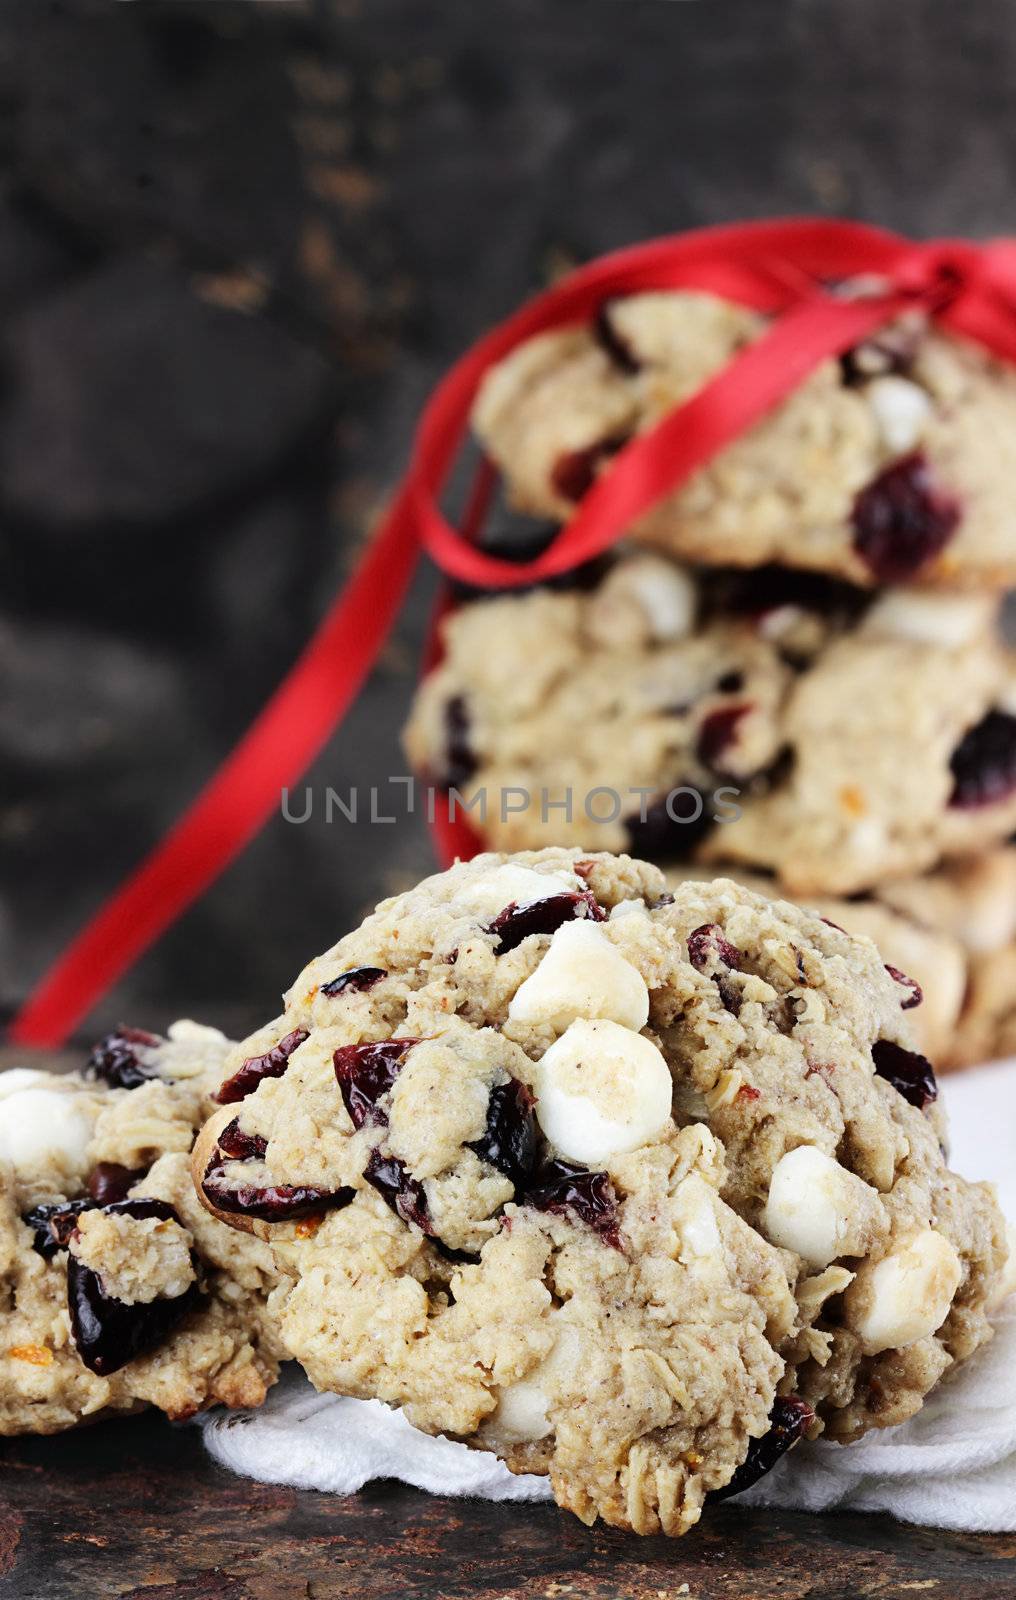 Cranberry, oats and white chocolate chip cookies over a rustic background.